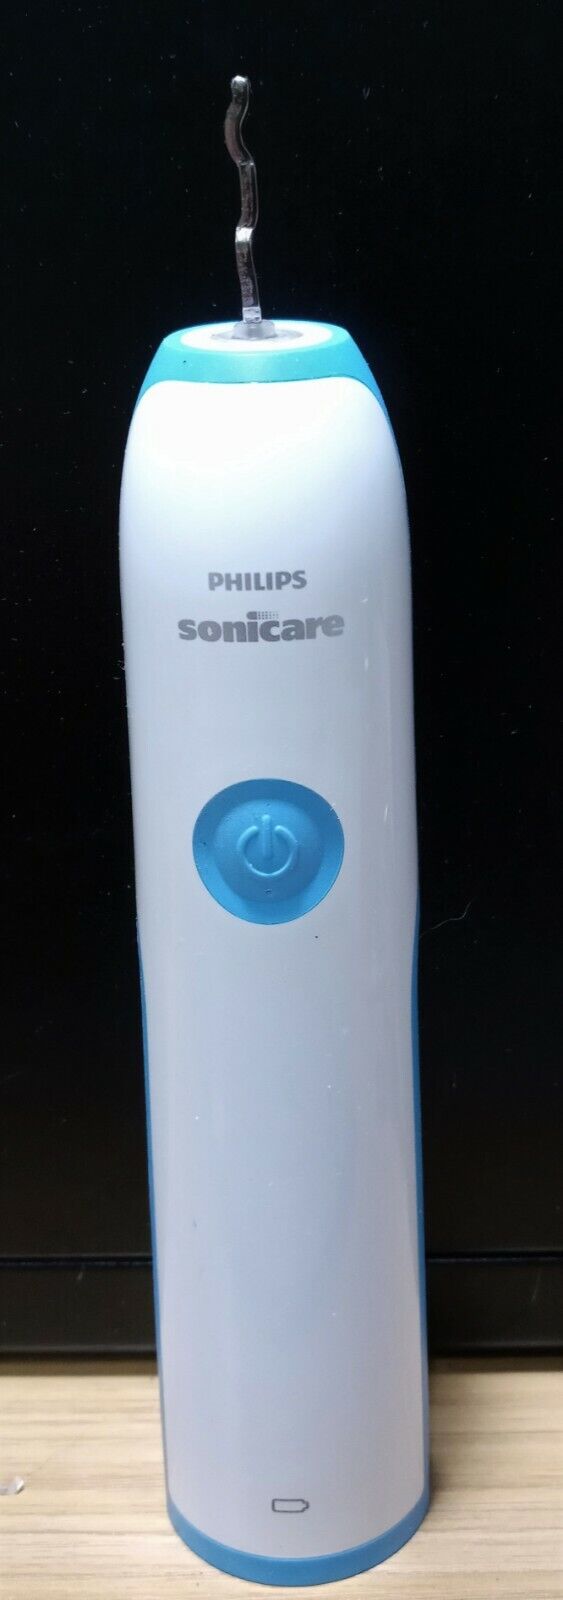 New Philips Sonicare HX3220B Electric Toothbrush Handle